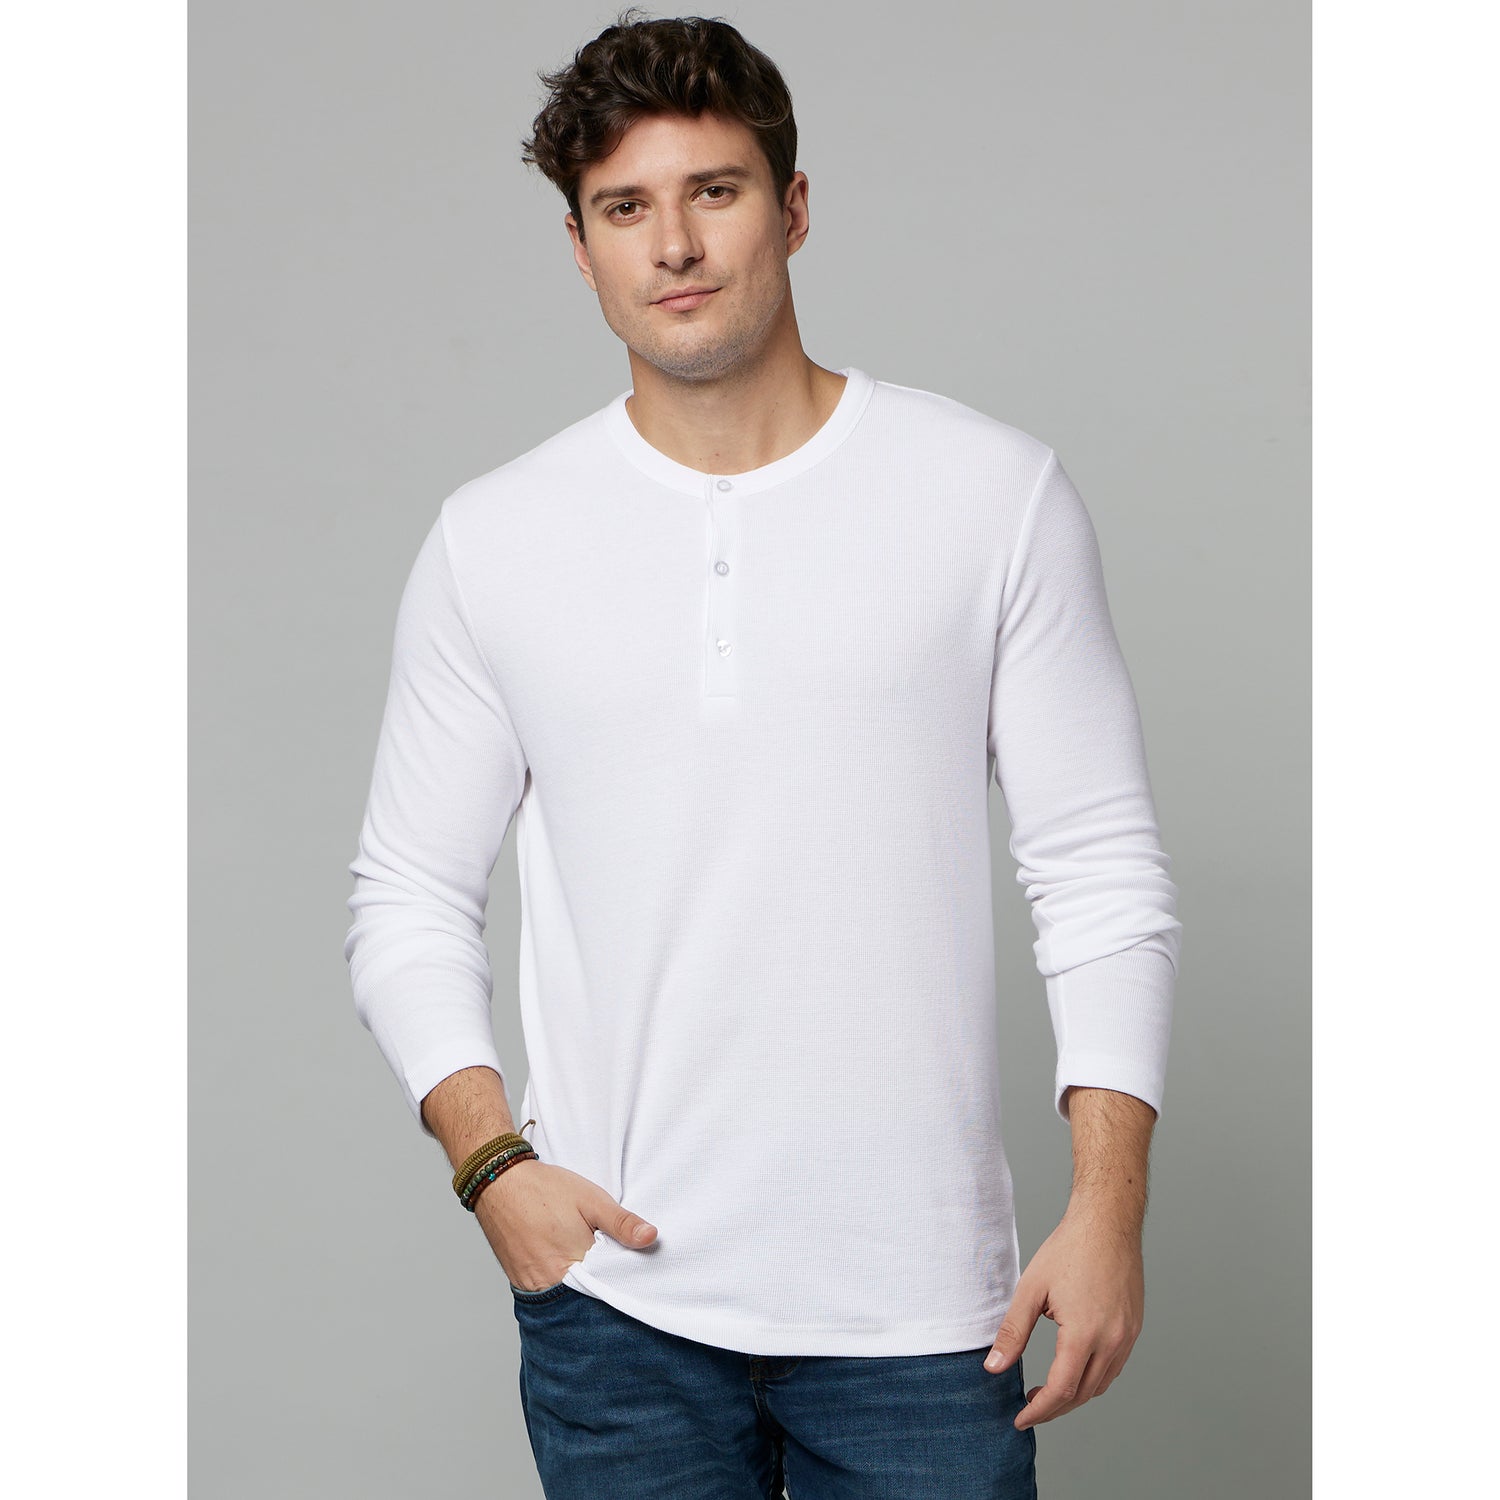 White Henley Neck Long Sleeves Cotton T-shirt (CEPLAYIN)